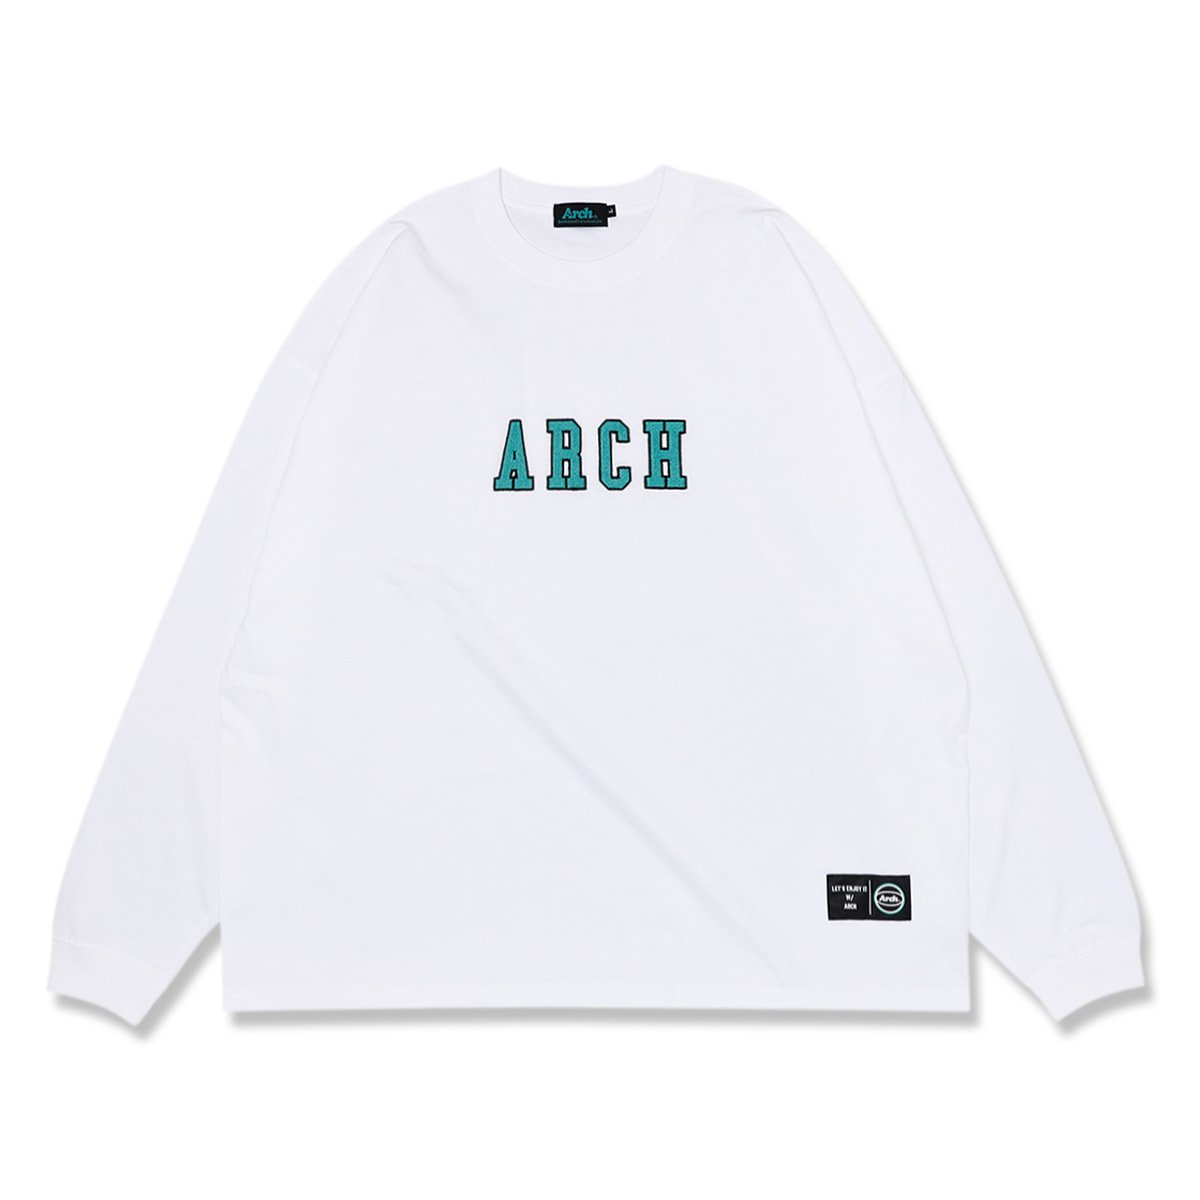 vertical embroidered wide L/S teewhite